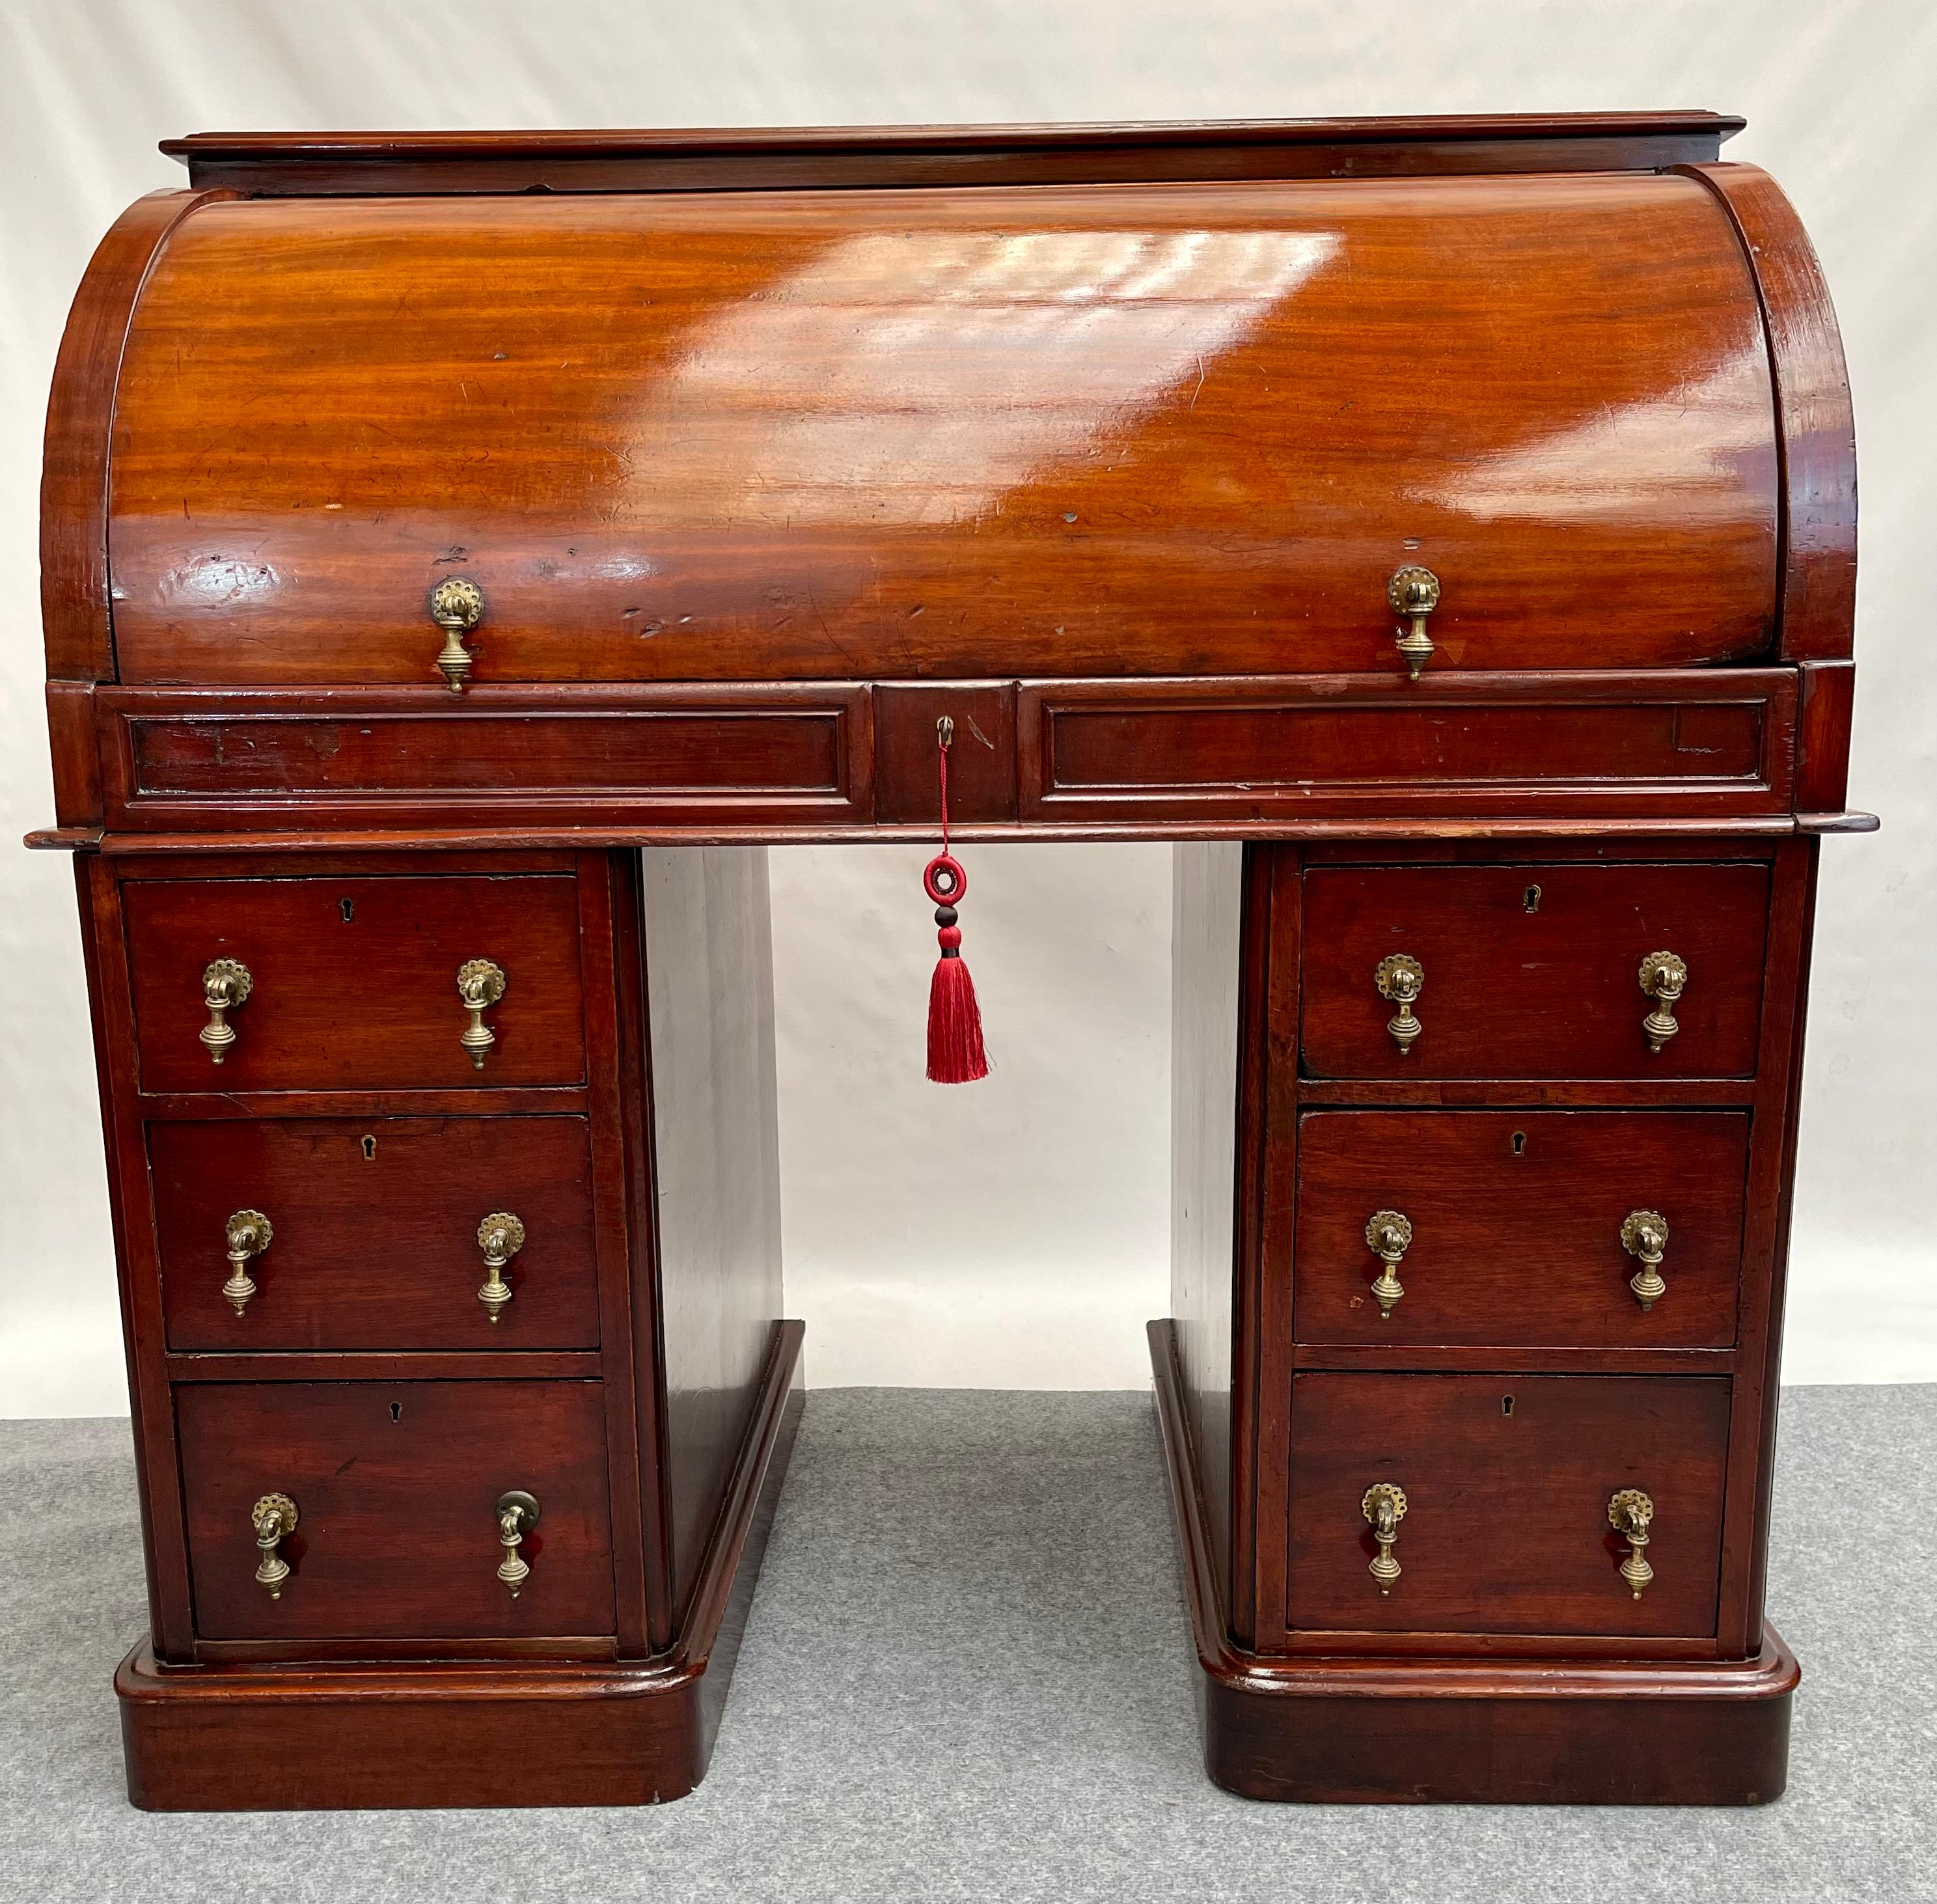 Discover the timeless charm of a Victorian desk crafted in England in 1830. This elegant Cuban mahogany desk is a true testament to the quality craftsmanship and refined style of the Victorian era. With a meticulously designed layout, this desk not